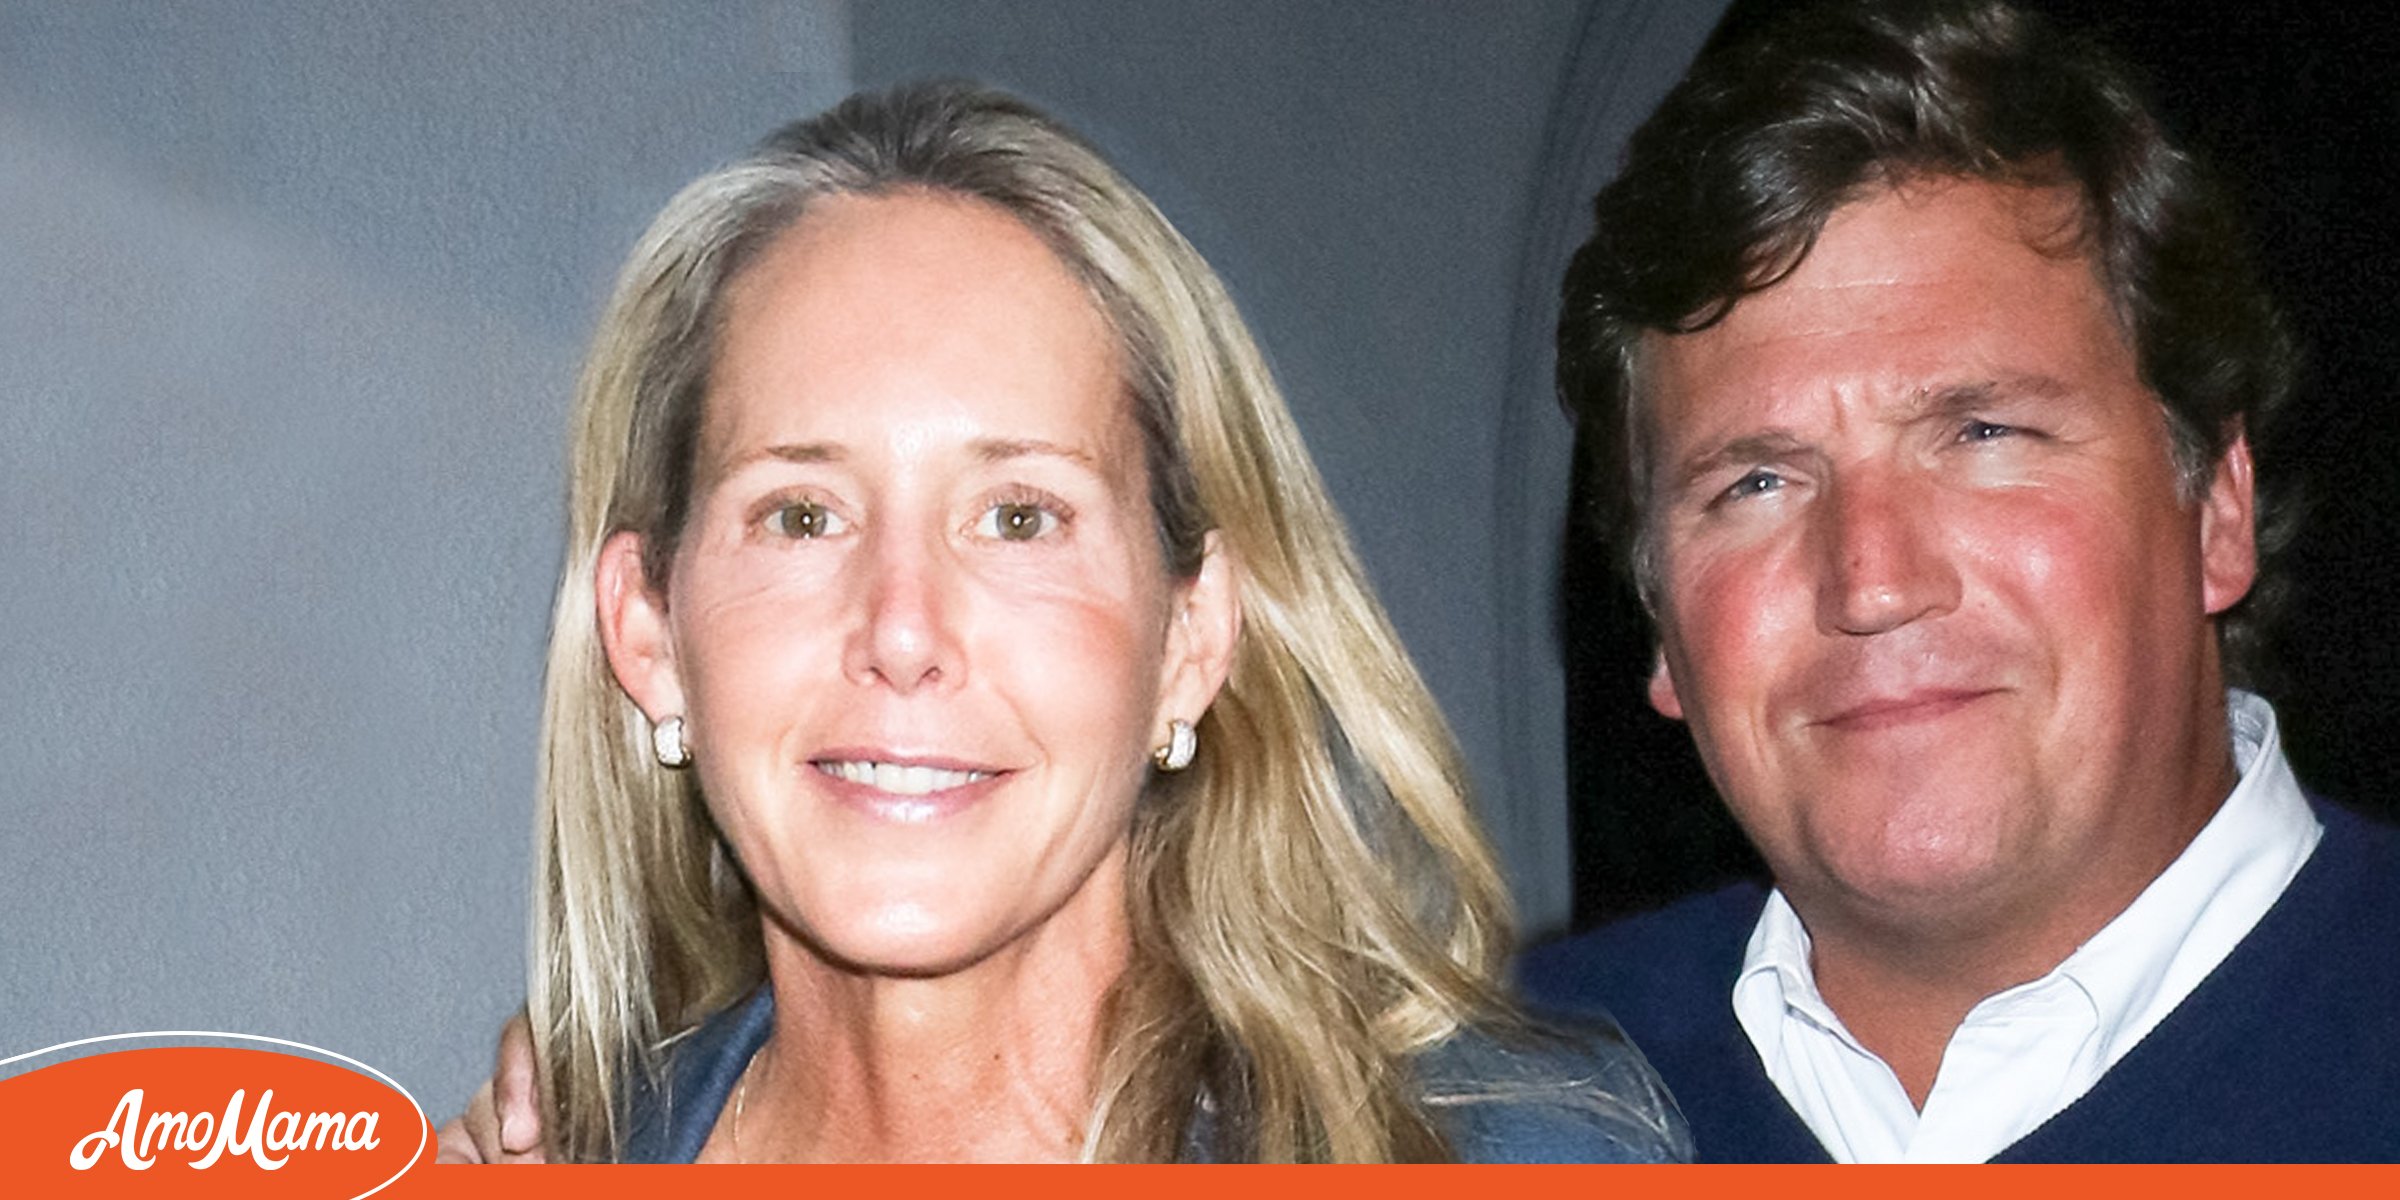 Susan Andrews Is Tucker Carlson's Wife Who Gave up Her Career to Raise Kids